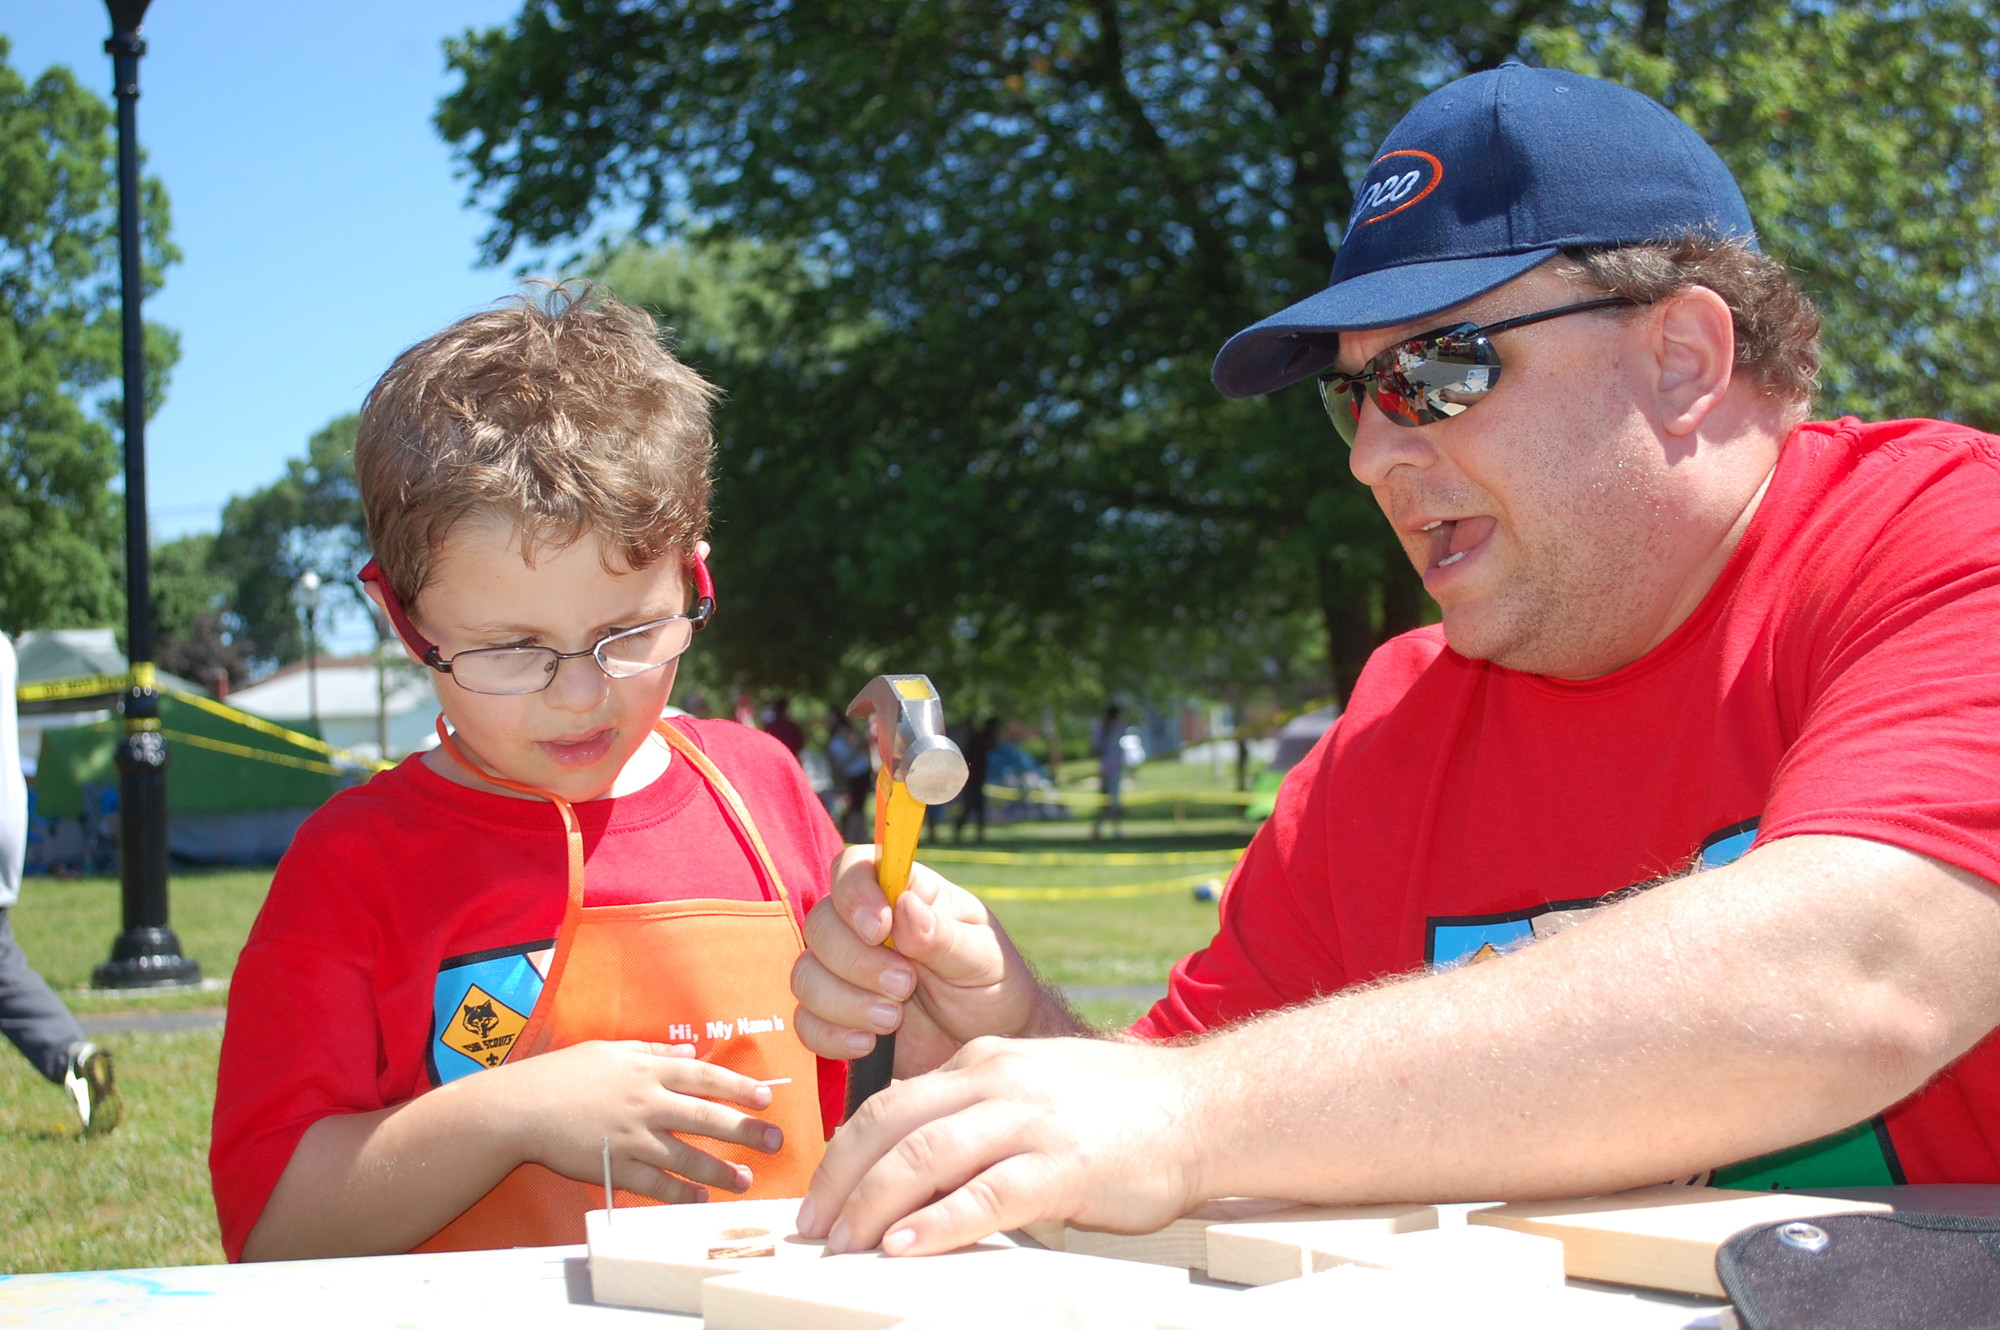 Sean Leon, 6, a Cub Scout from Pack 367, got some help from his father, Shawn, in building a birdhouse at the annual Valley Stream Scout Camporee held last weekend on the Village Green.